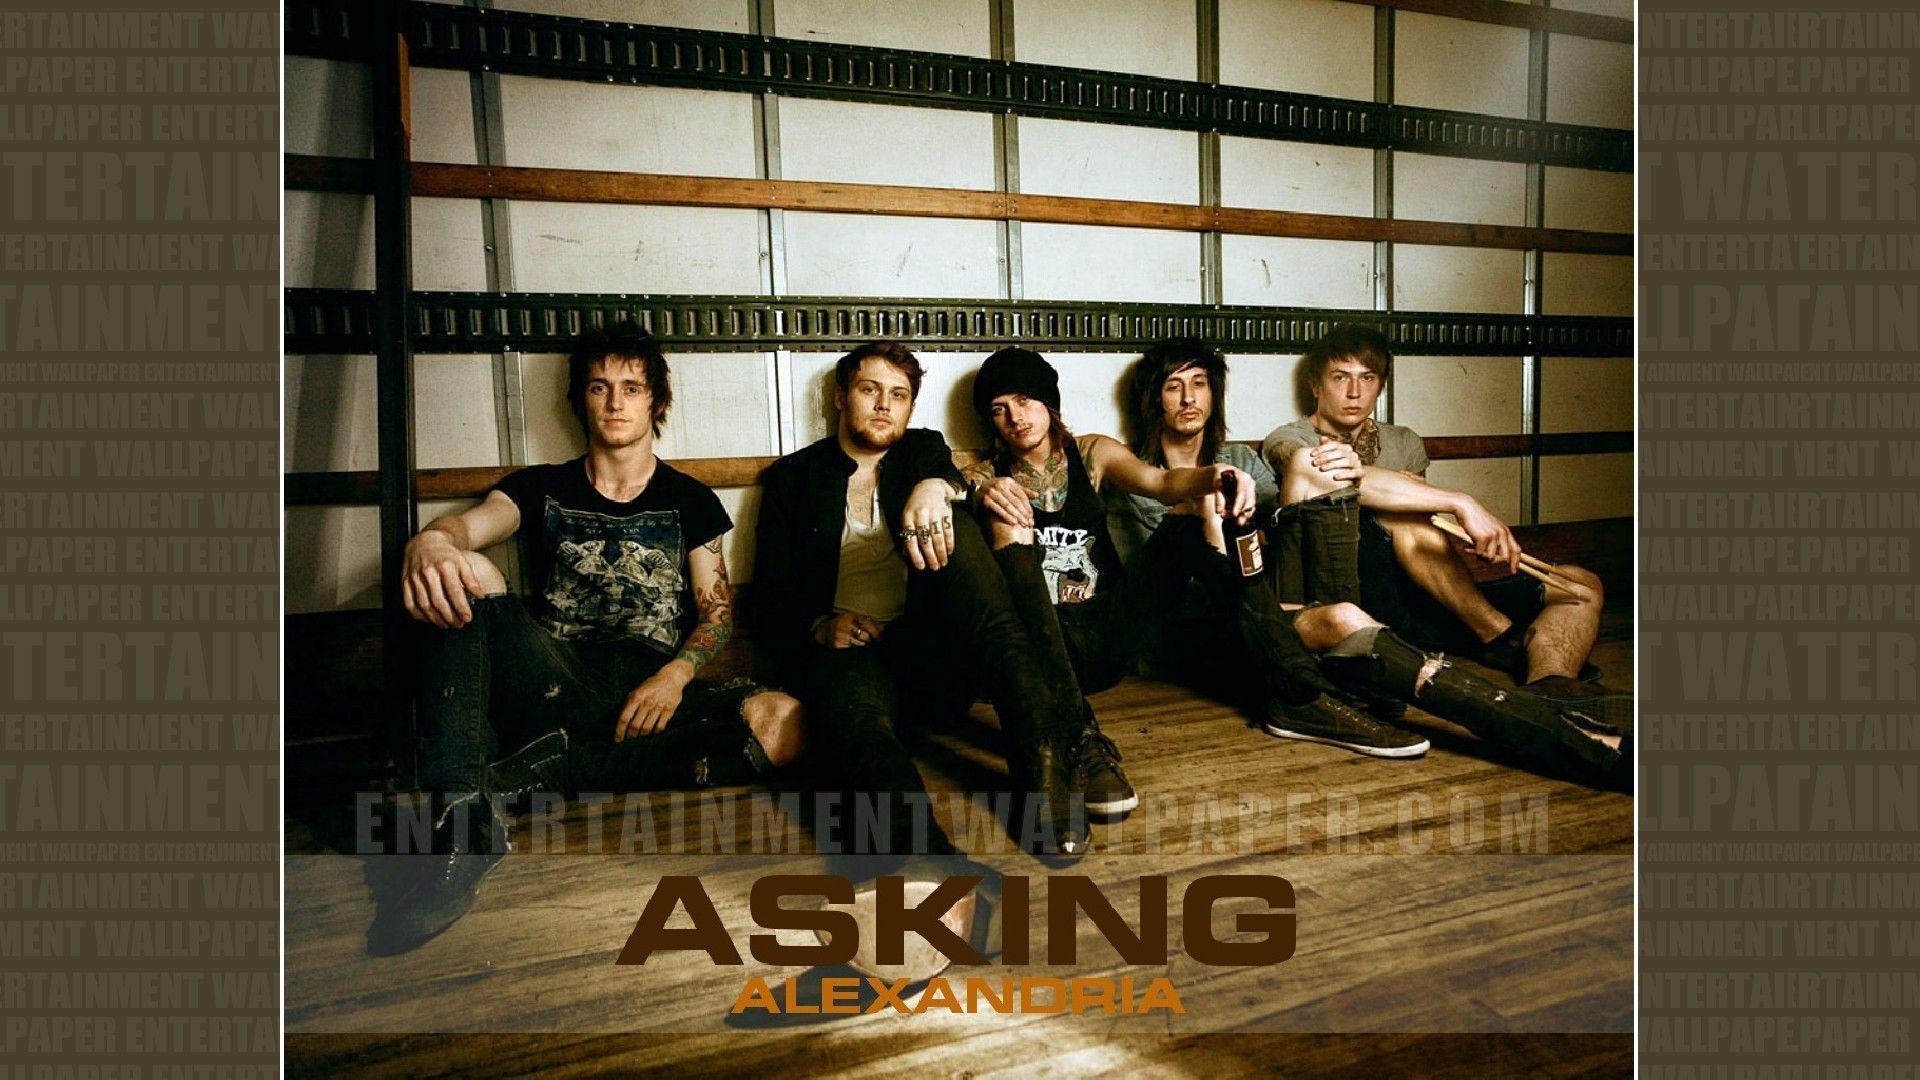 Asking Alexandria 2016 Related Keywords & Suggestions